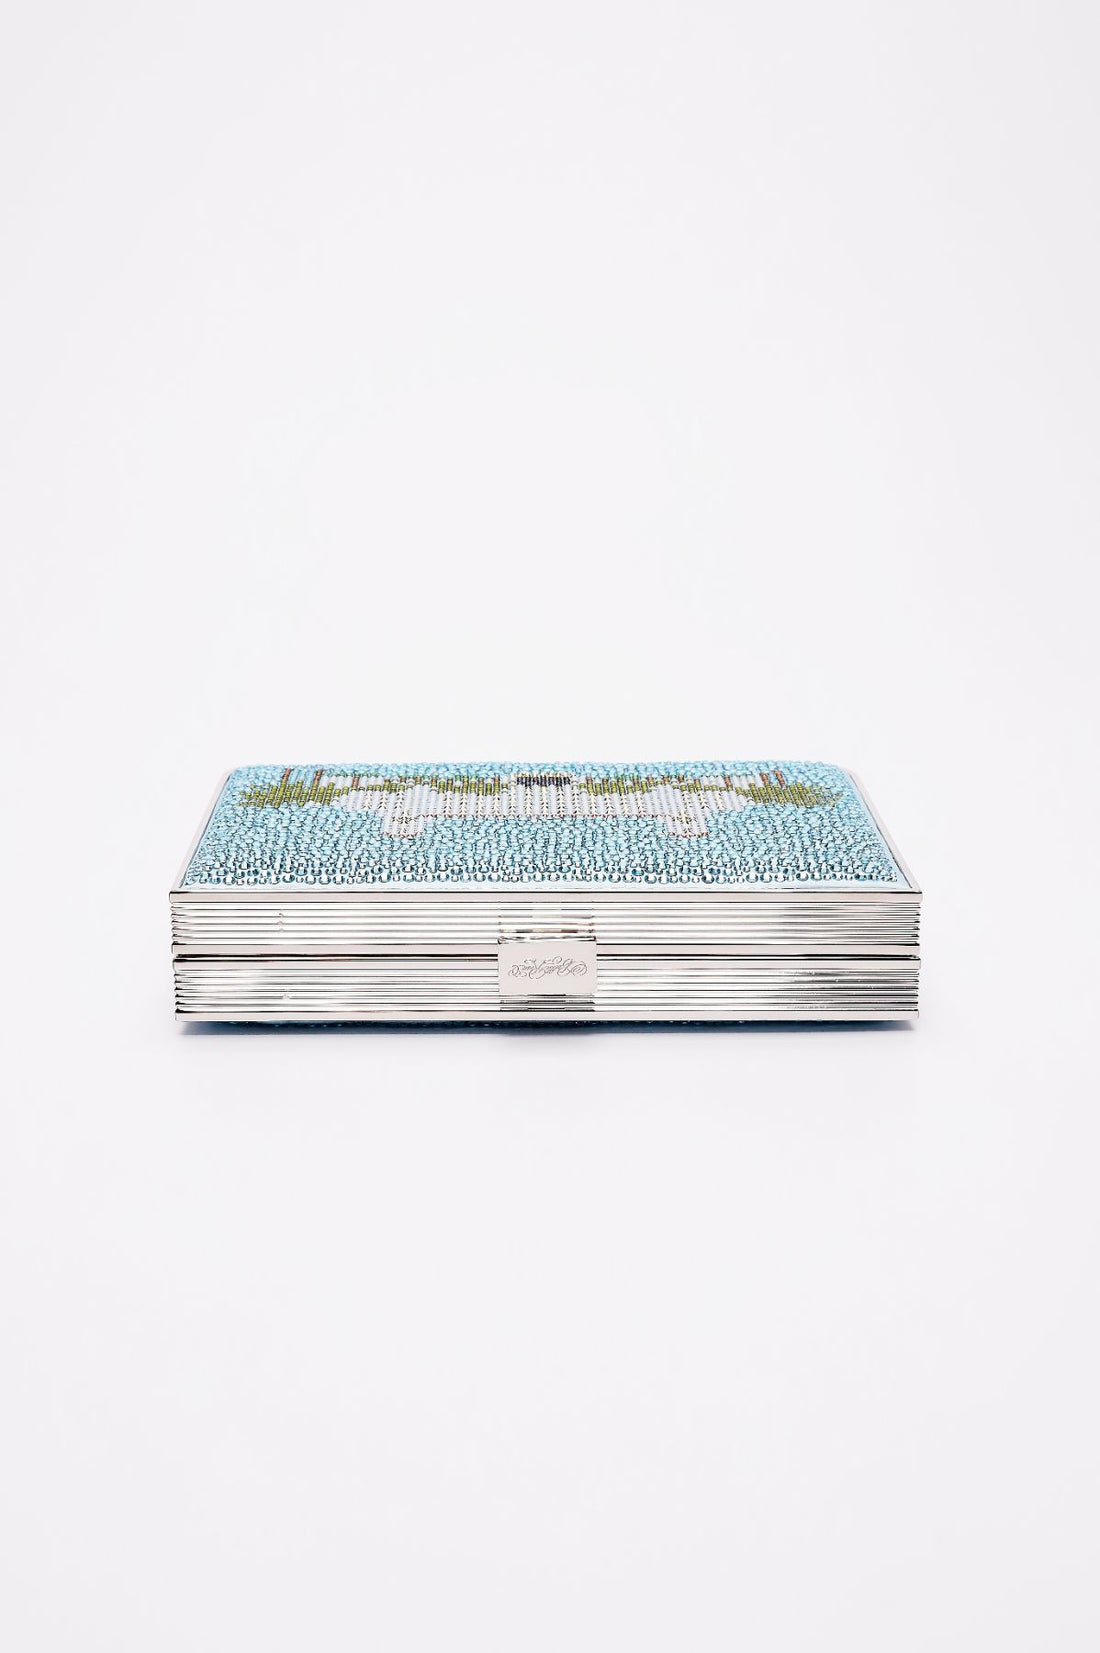 A Breakers Crystal Rhinestone Clutch from The Bella Rosa Collection on a white surface in Palm Beach.